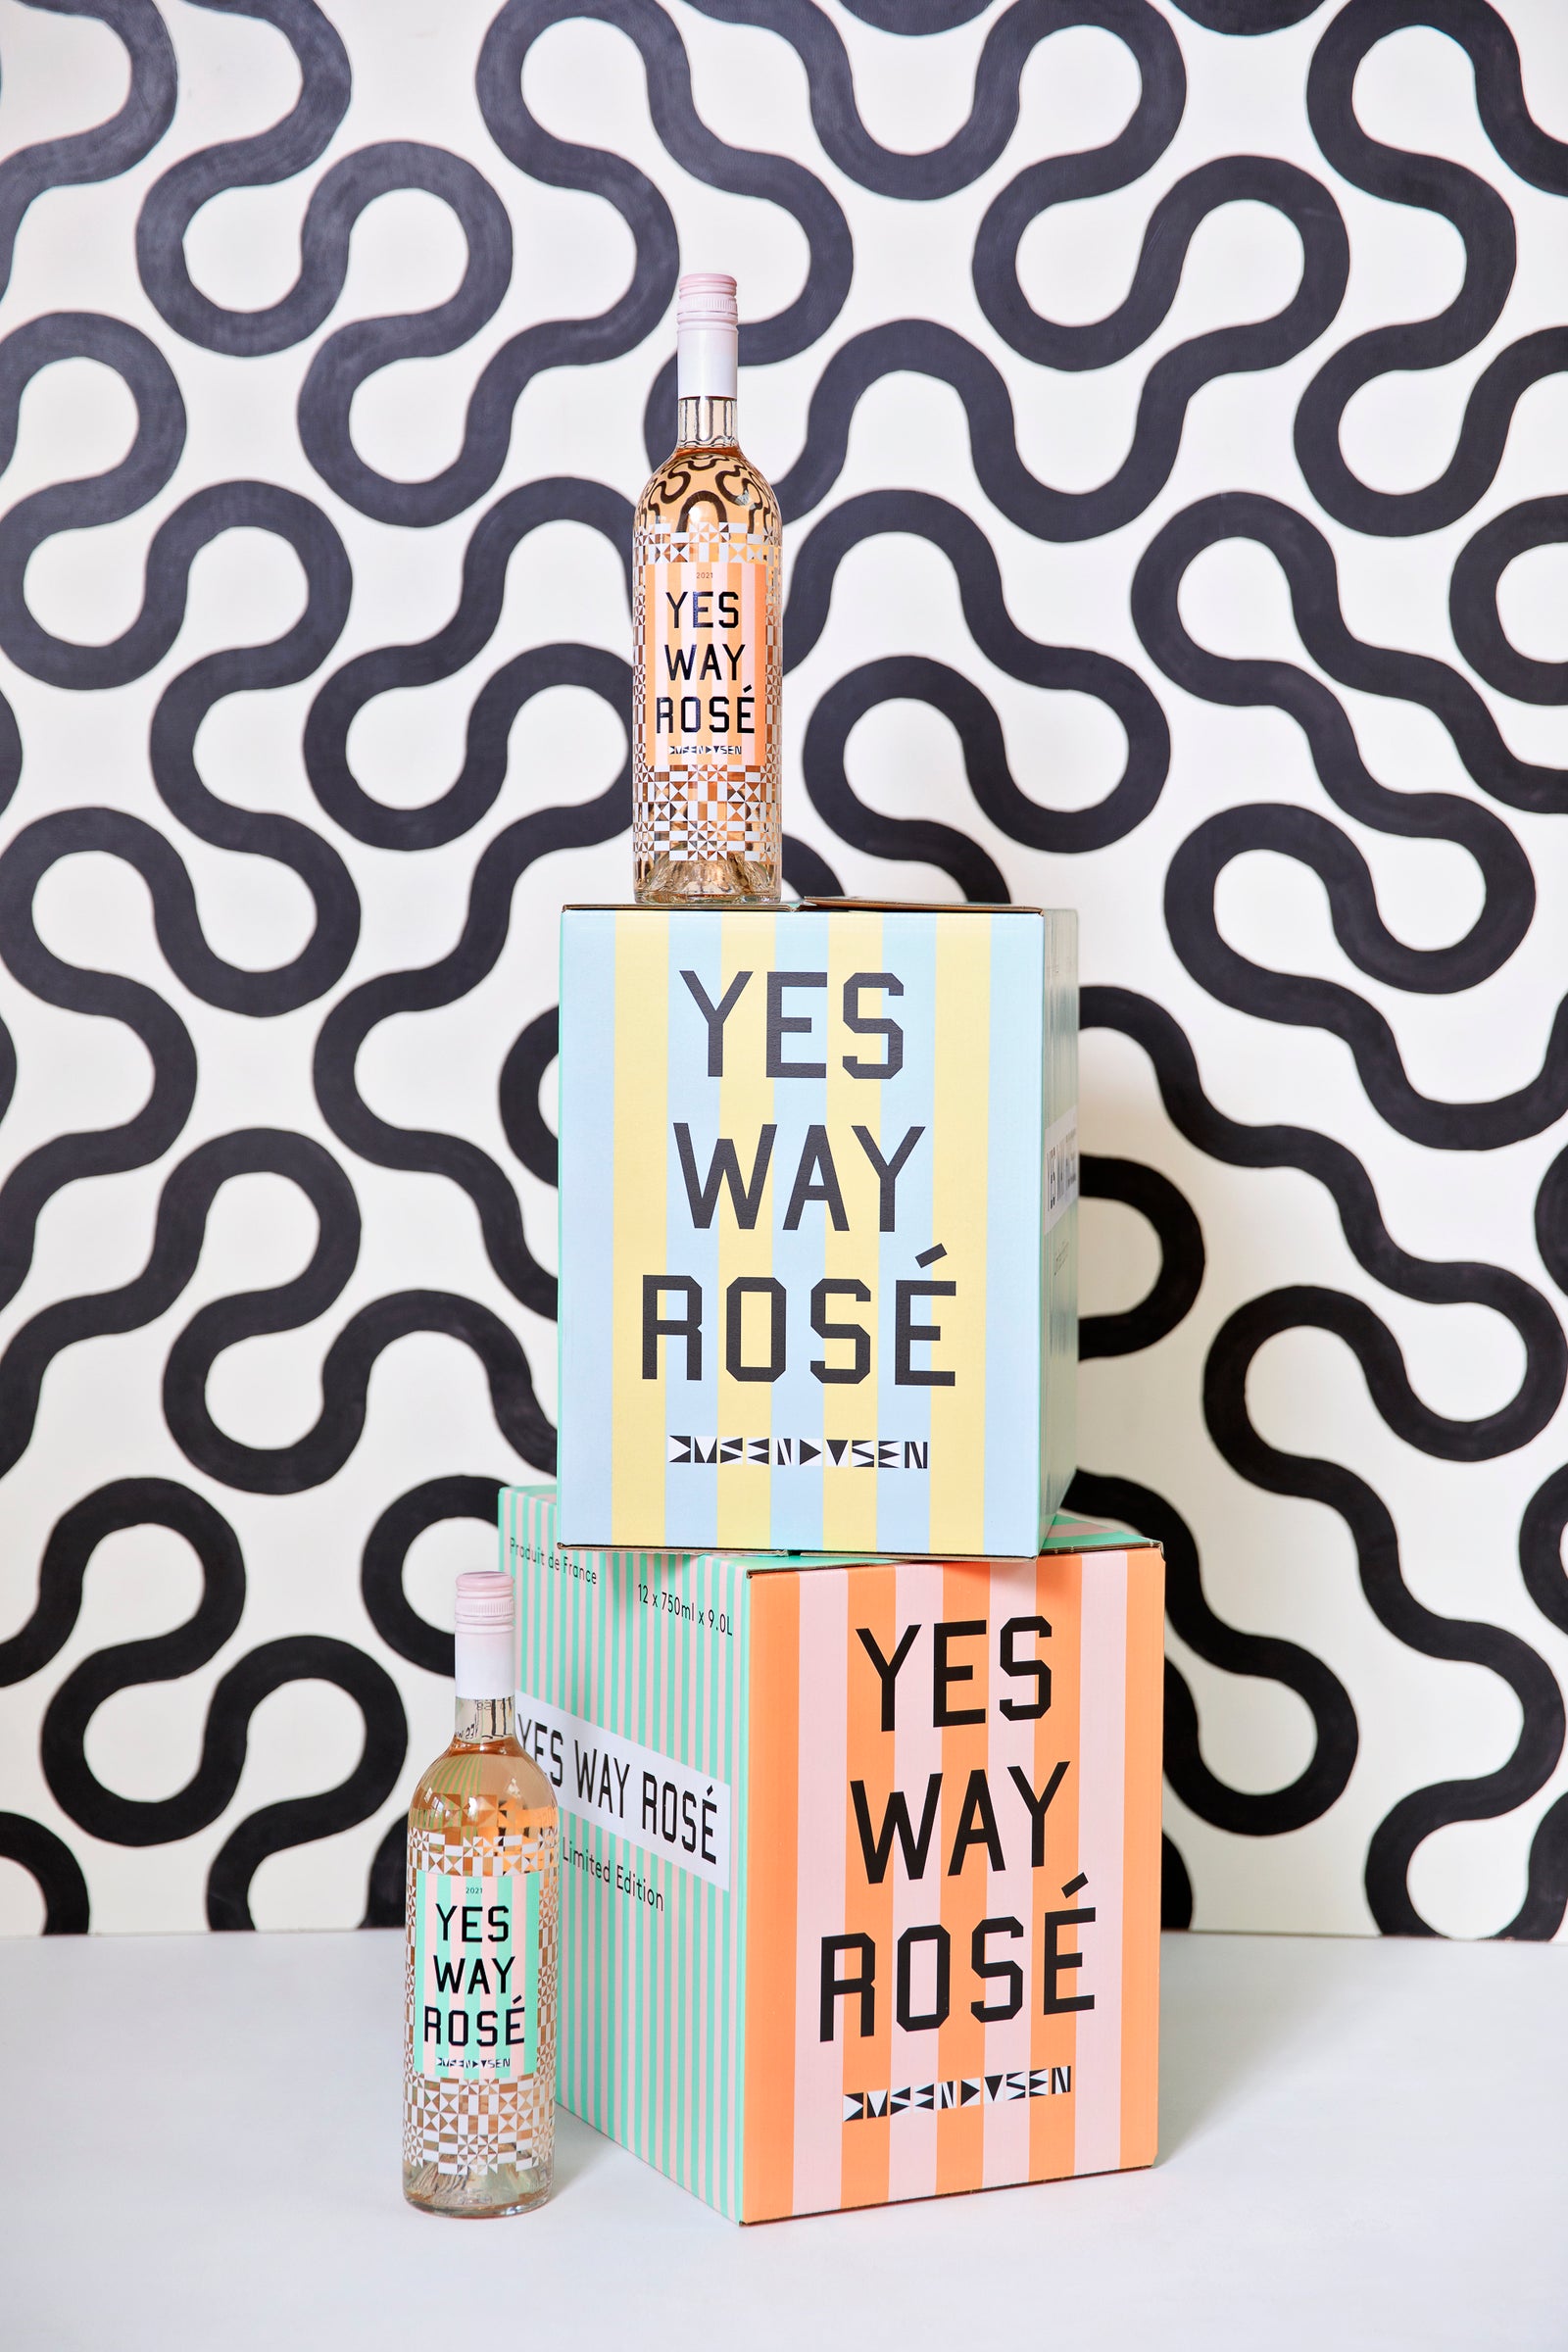 Yes Way Rosé Anniversary Bottle